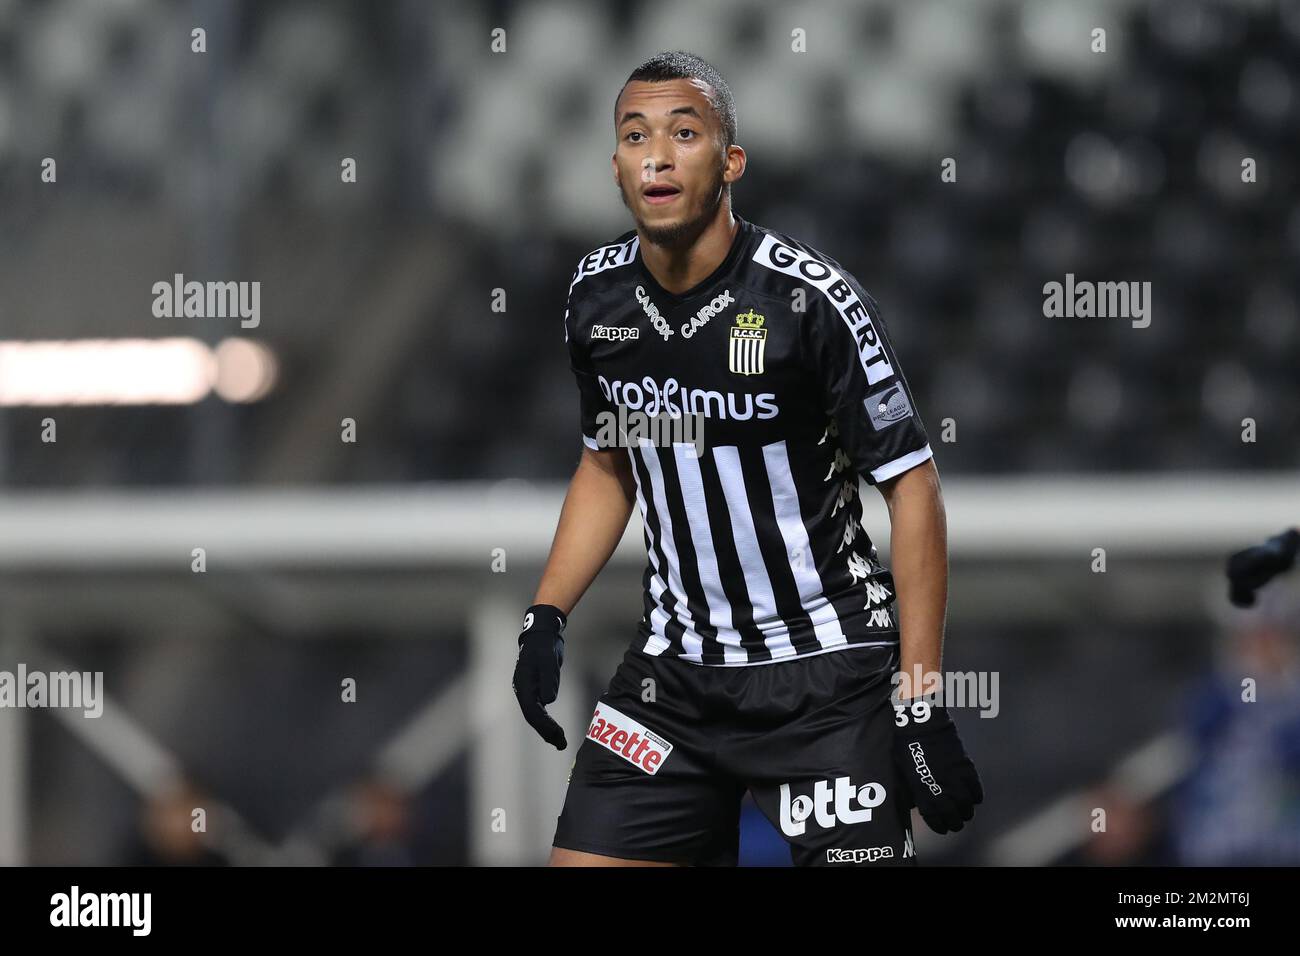 Vormen smaak spoel Charleroi's David Henen pictured during a soccer game between JPL clubs  Sporting Charleroi and KRC Genk, Wednesday 05 December 2018 in Charleroi,  in the 1/8th finals of the 'Croky Cup' Belgian cup.